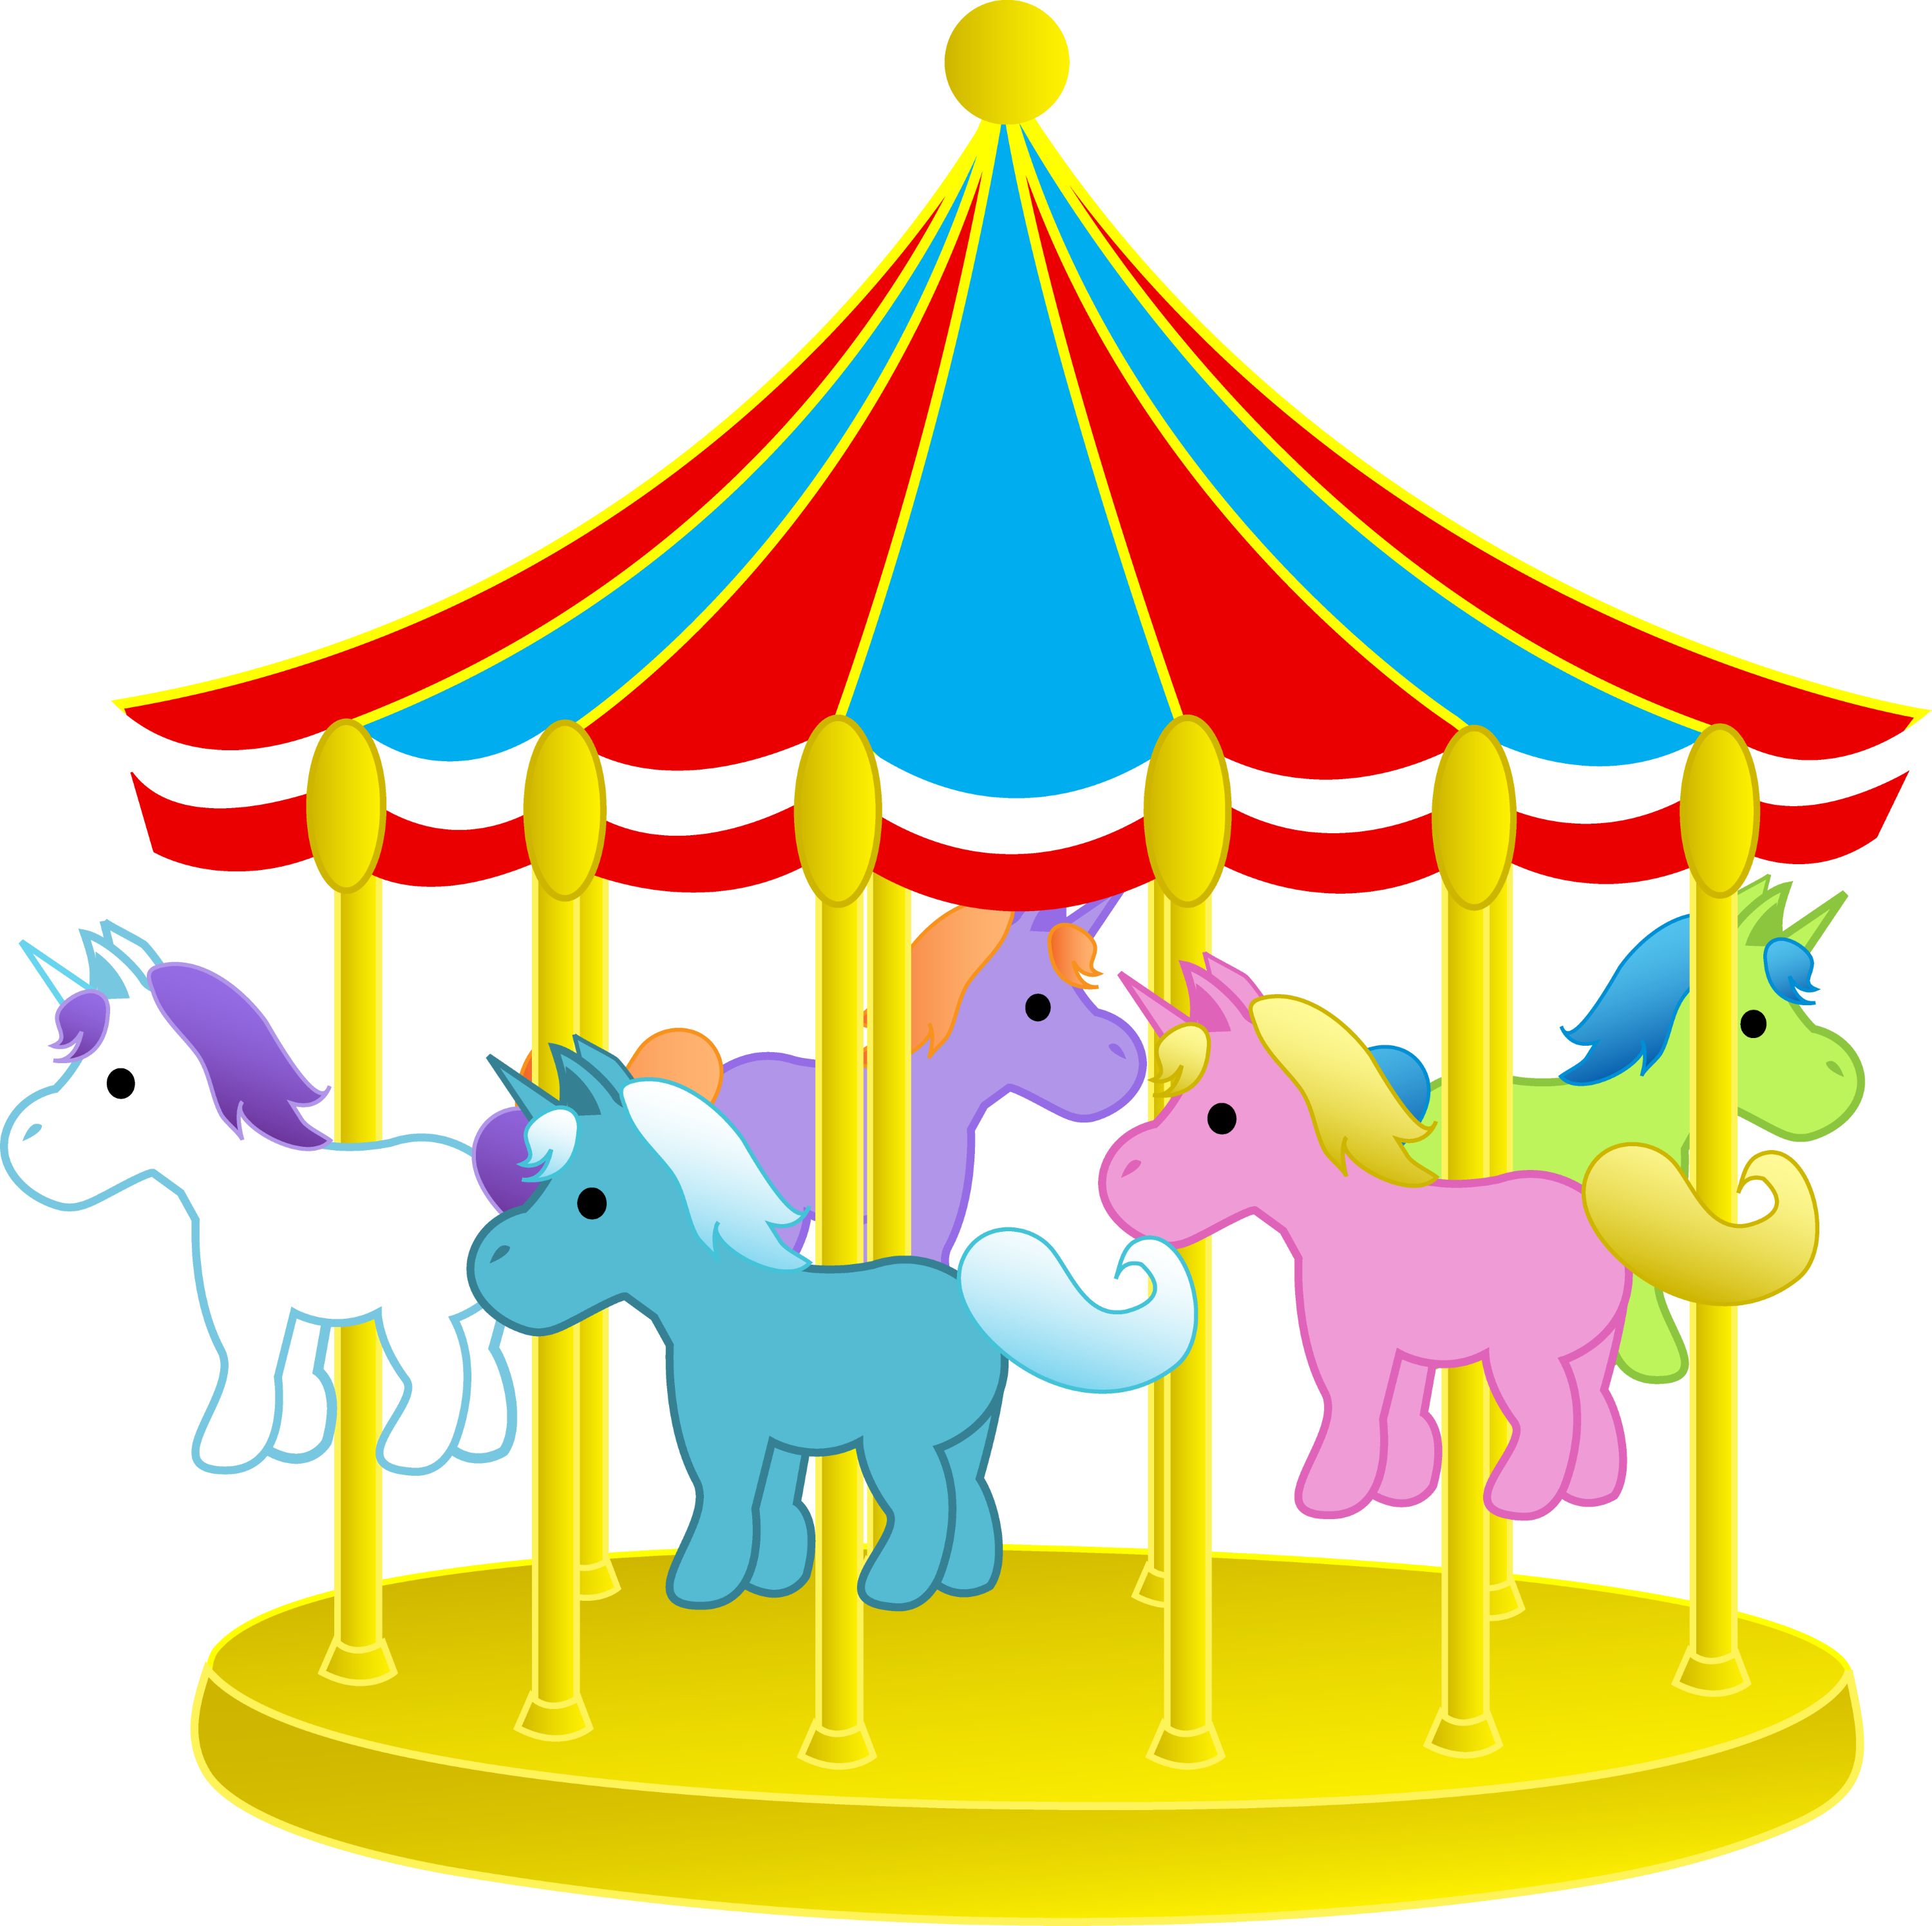 objects_carnival_carousel_1.png